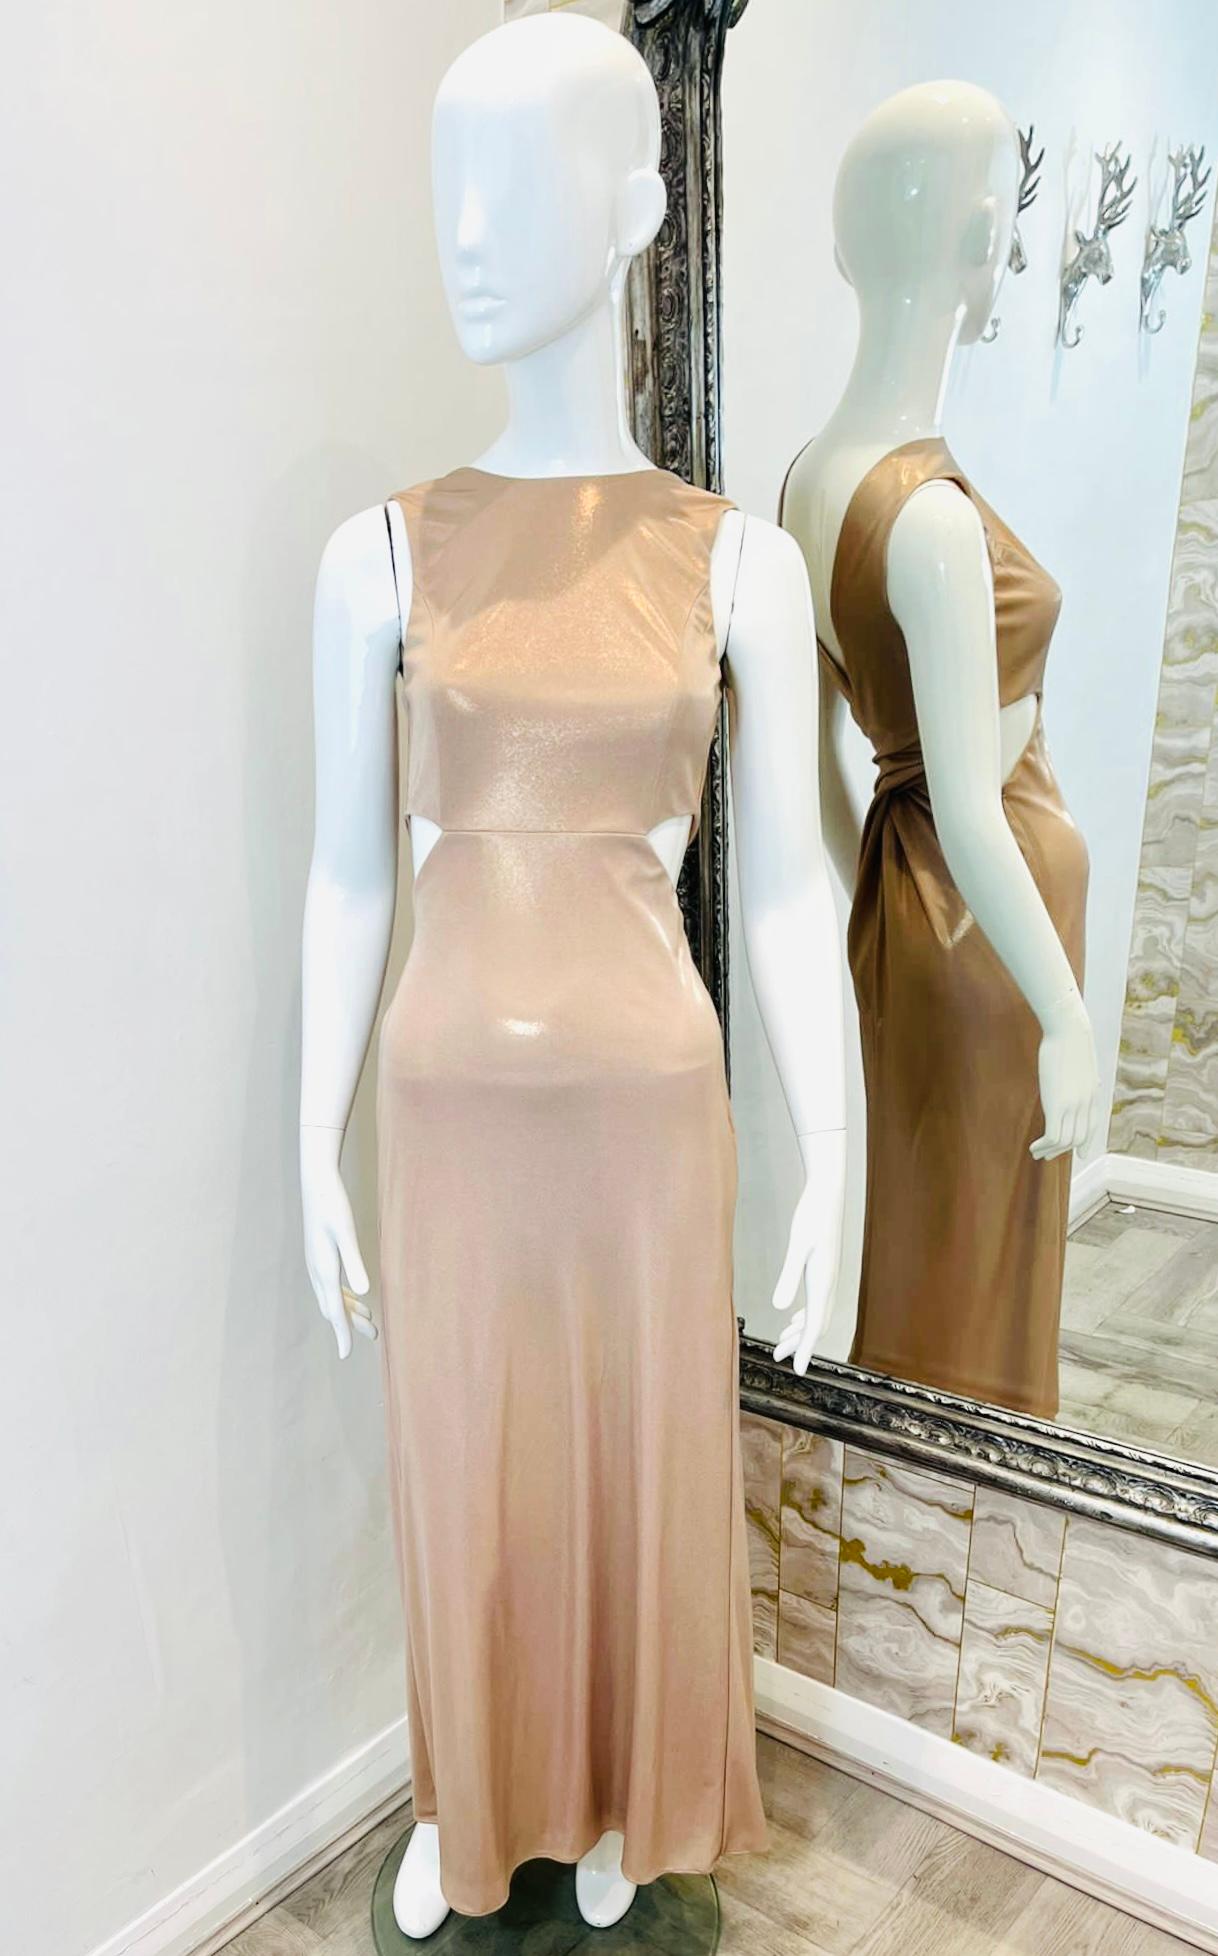 Halston Heritage Cut-Out Dress

Champagne gold, sparkling maxi dress designed with cut-out detailing to the sides.

Featuring deep V-Neck to rear and wrap-around accent.

Boat neckline, and pull-on, sleeveless style.

Size – XS

Condition – Very